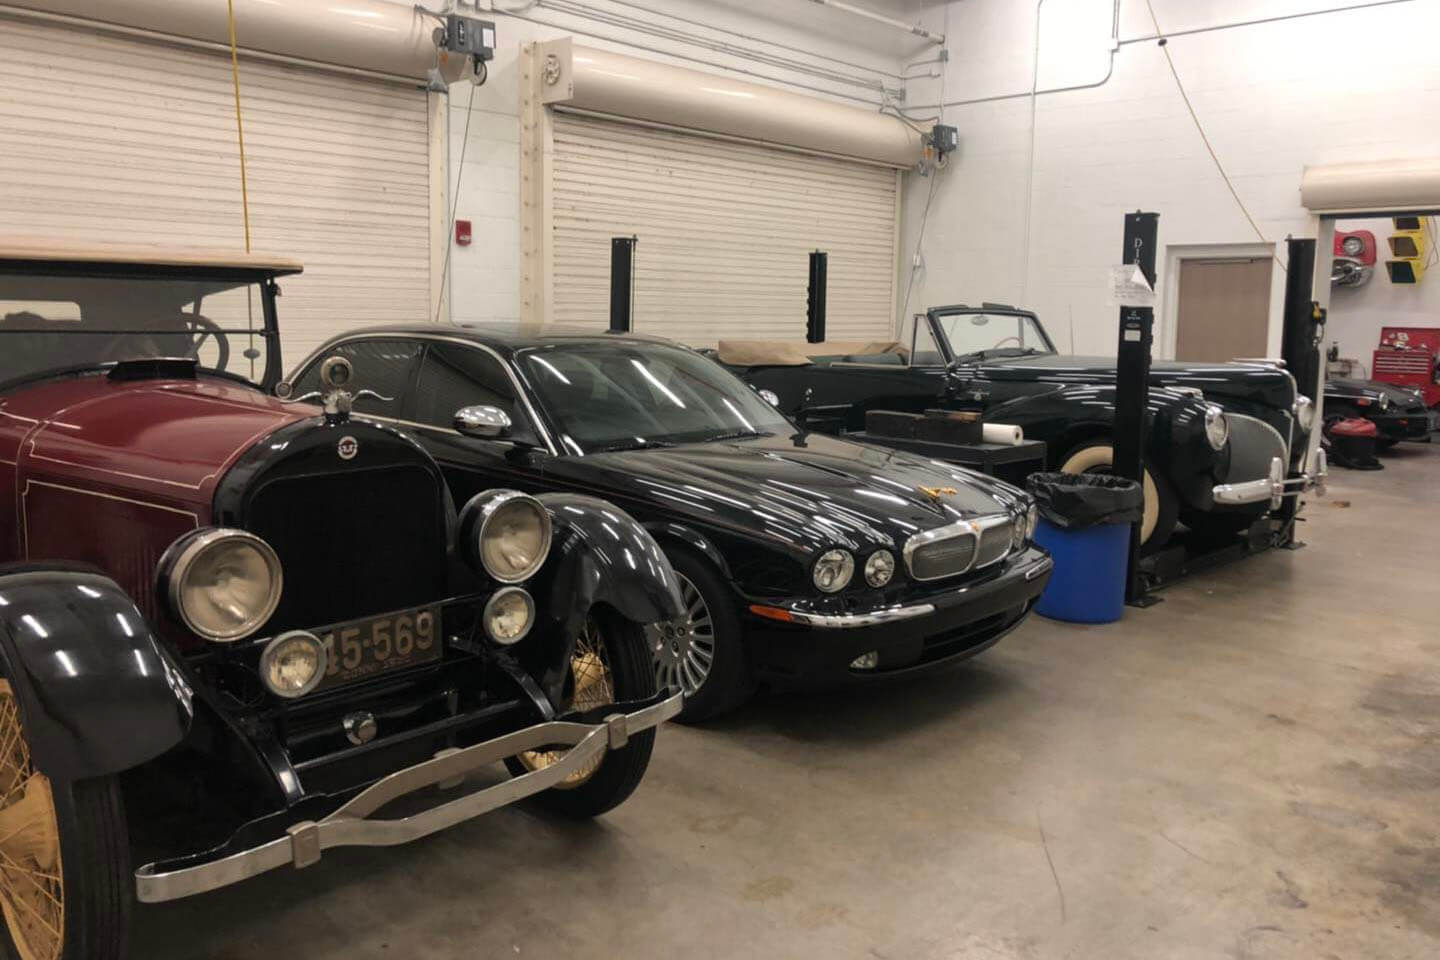 Cars new and old at Elliot Museum 